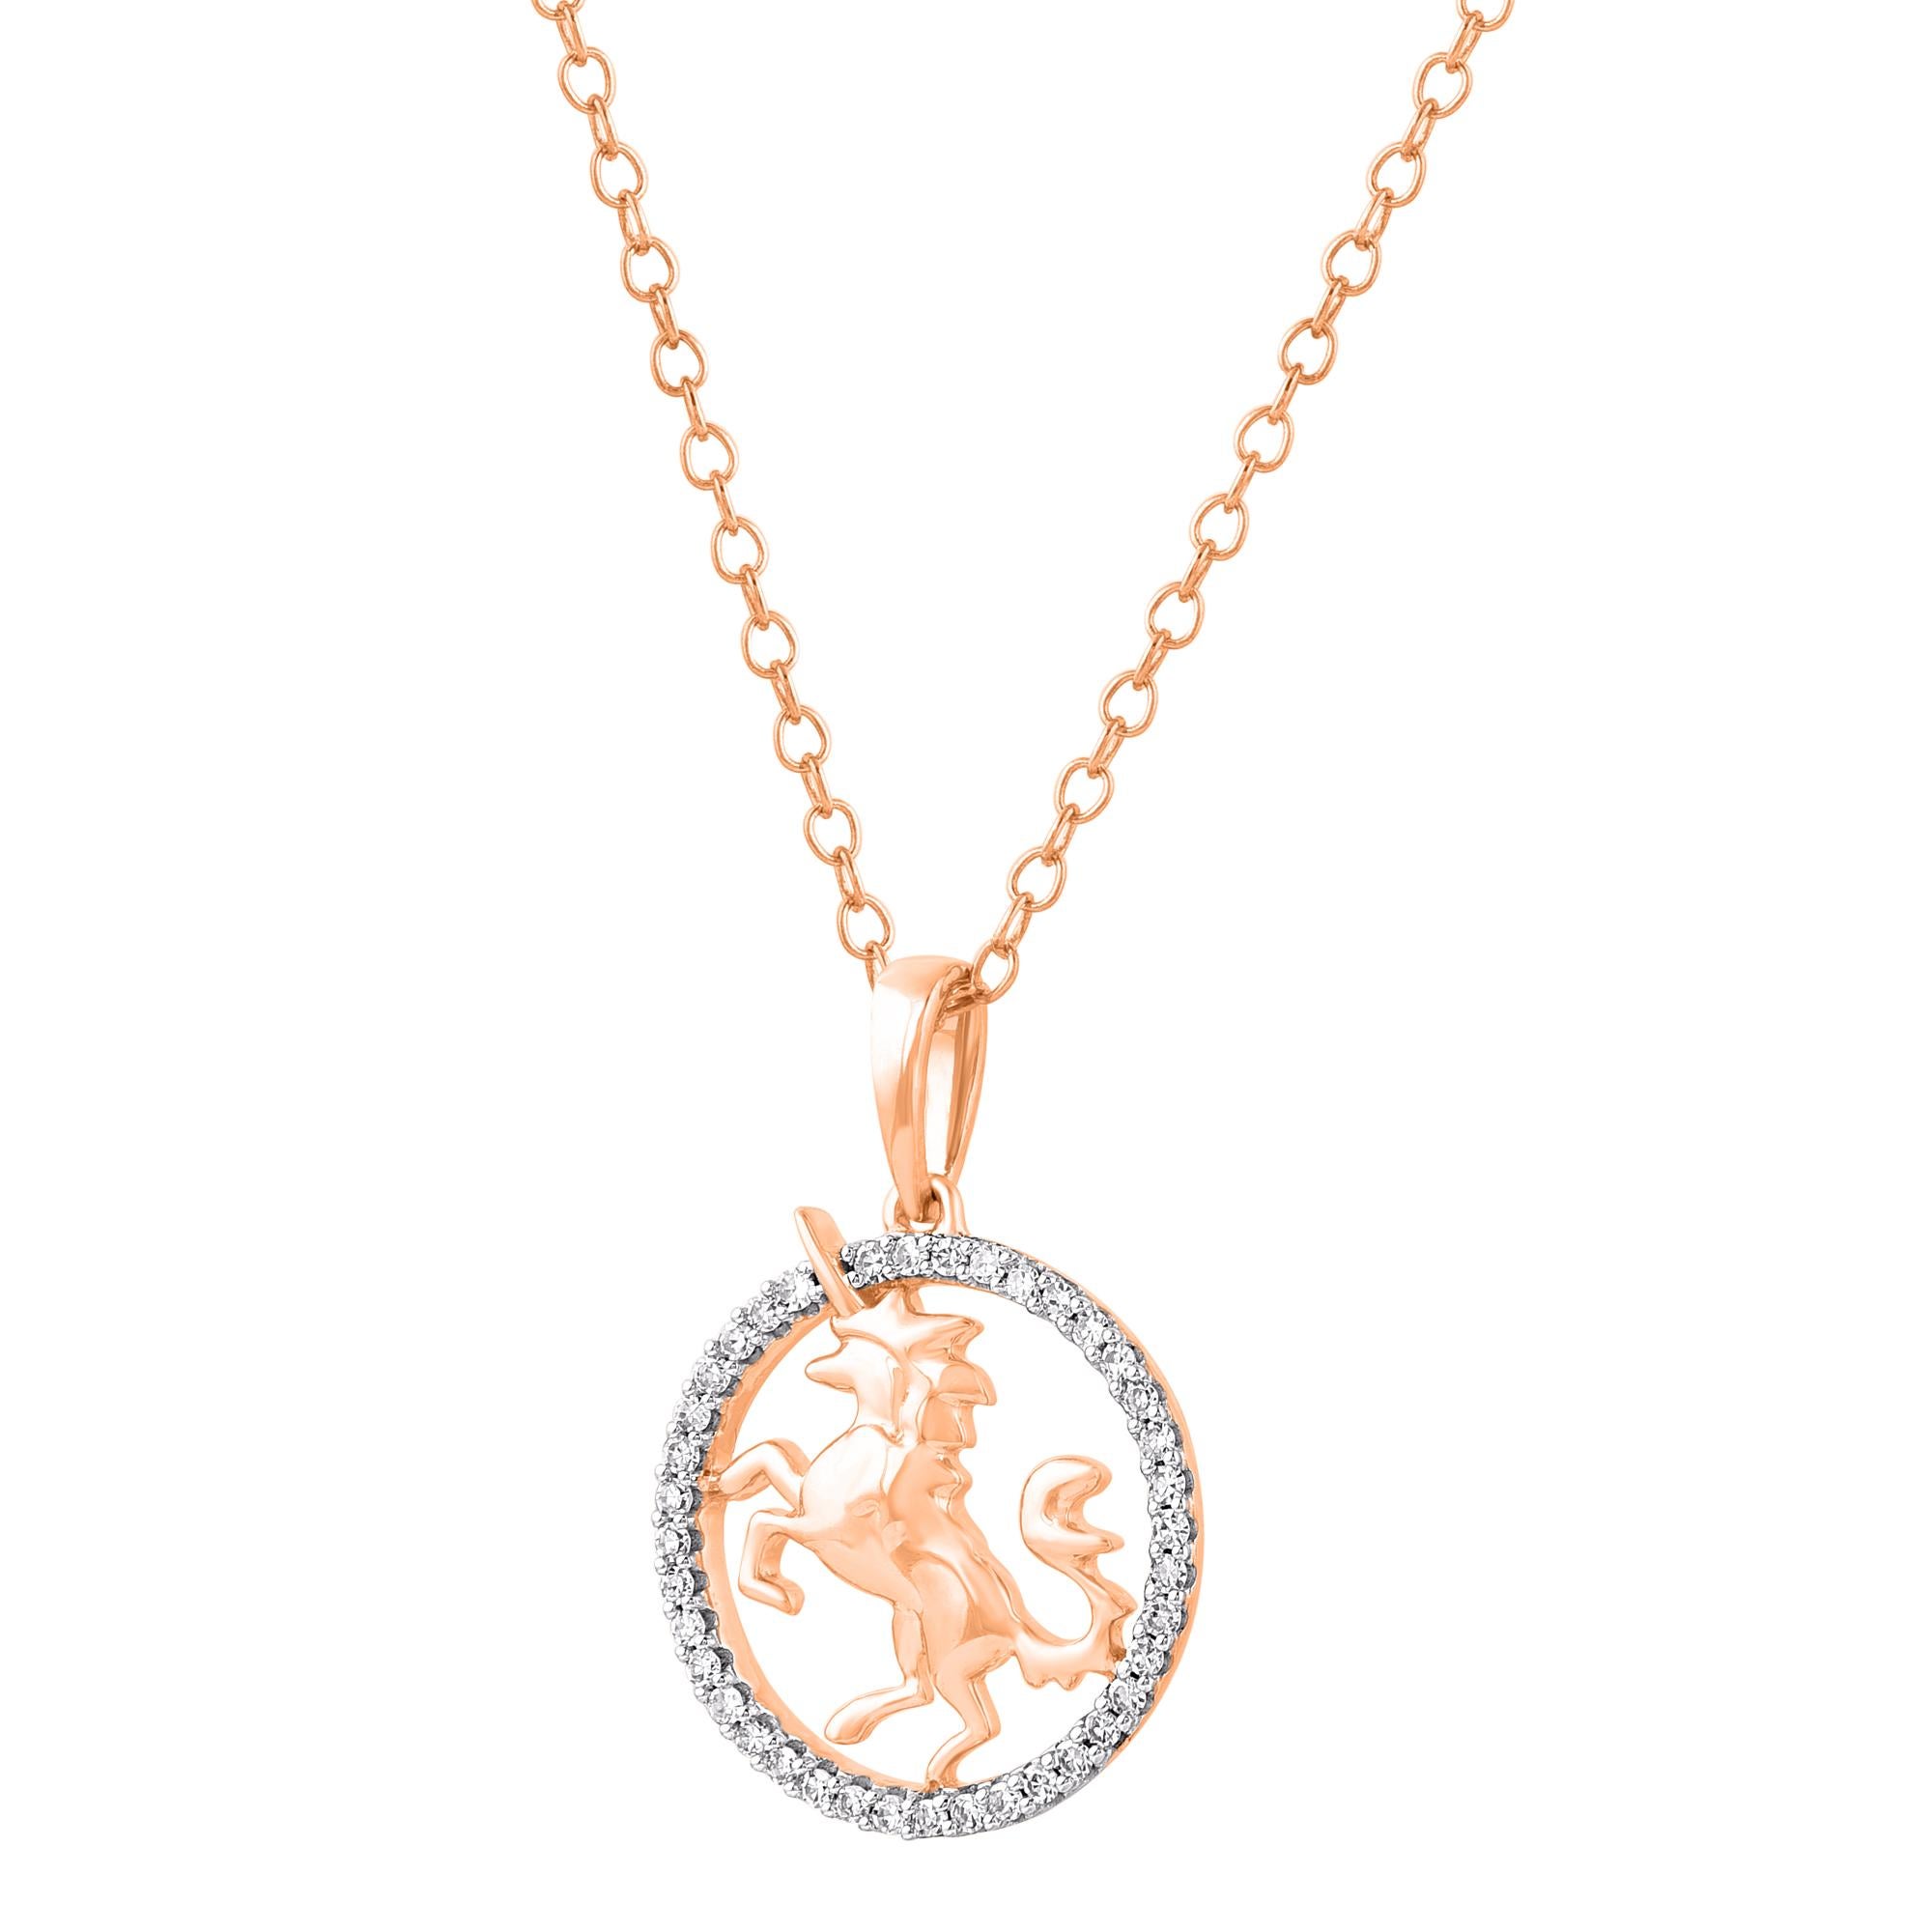 Make your mark with this circular dazzling diamond unicorn pendant. This pendant studded with 39 round diamond set in prong setting, H-I color, I2 clarity. The total diamond weight is 0.12 carat and this pendant suspends along with an 18 inches